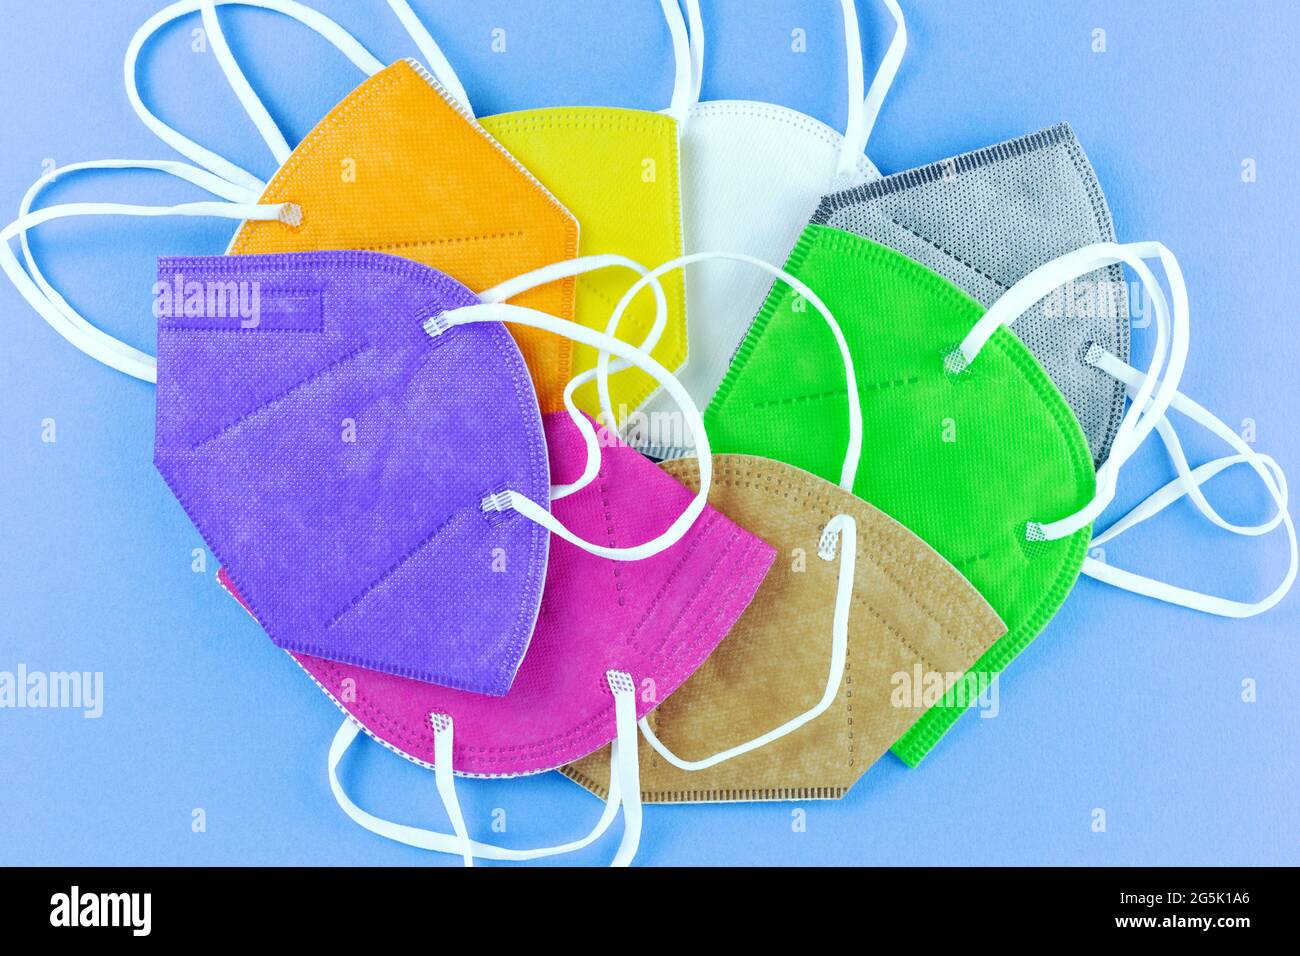 Heap of  different colors face masks respirators on blue background. Top view flat layer. Protection from covid virus during pandemic. Stock Photo